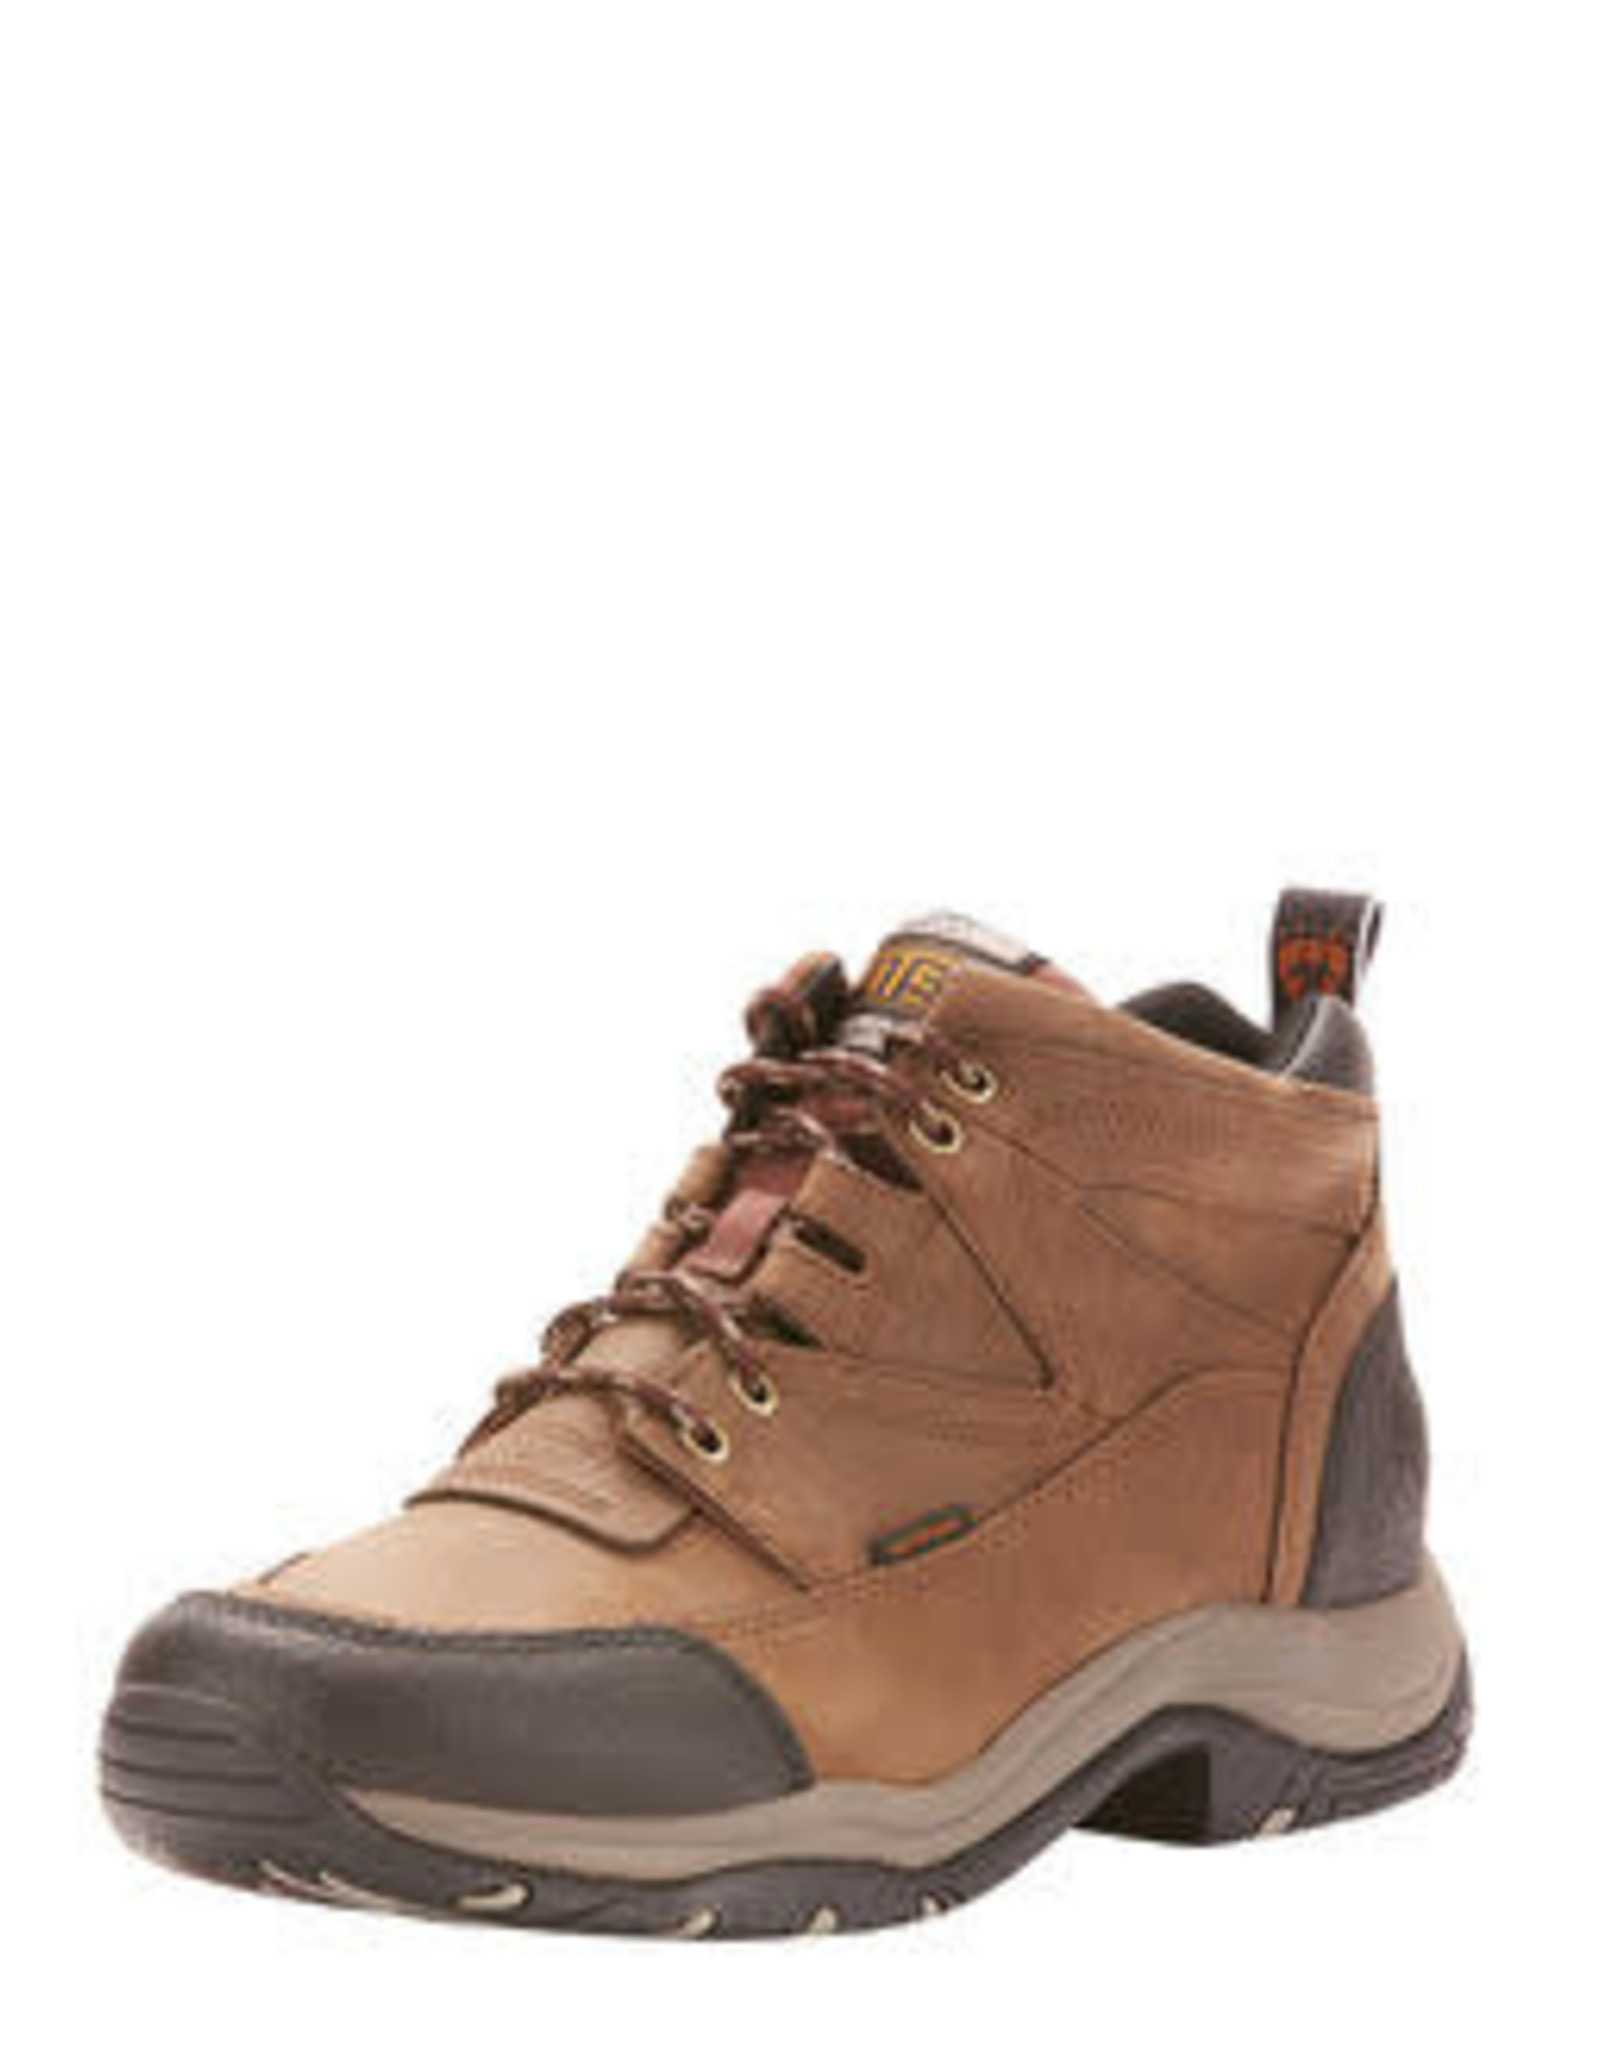 Boots Ariat Terrain H2O - Toll Booth Saddle Shop